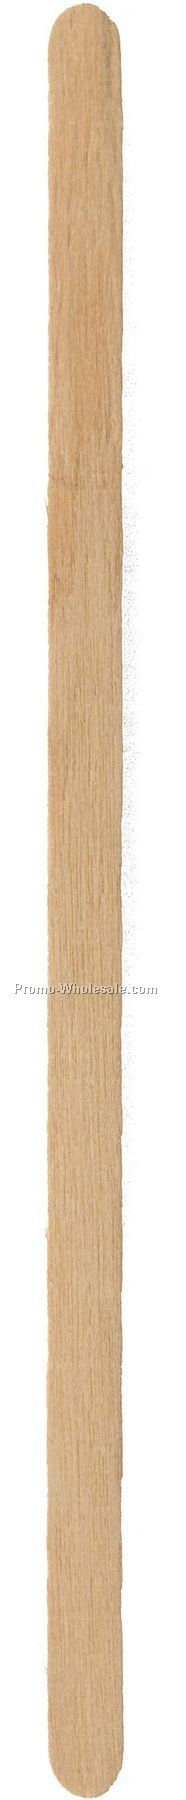 5-1/2" Long Flat Wood Stirrer Collection